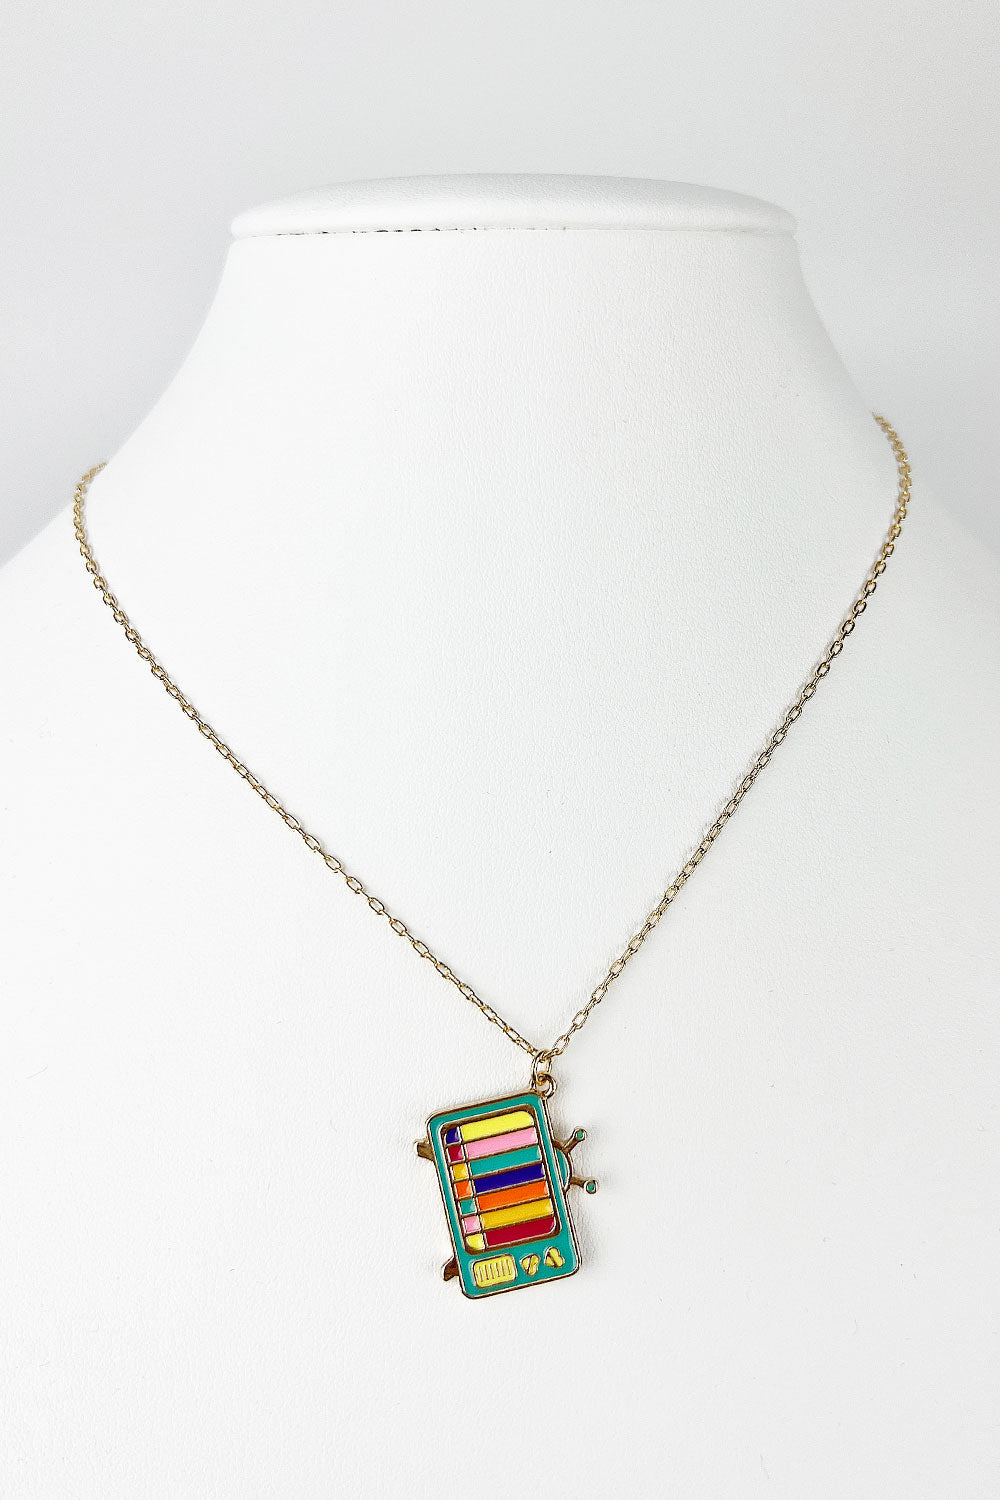 COLORFUL TELEVISION SCREEN ENAMEL SHORT NECKLACE